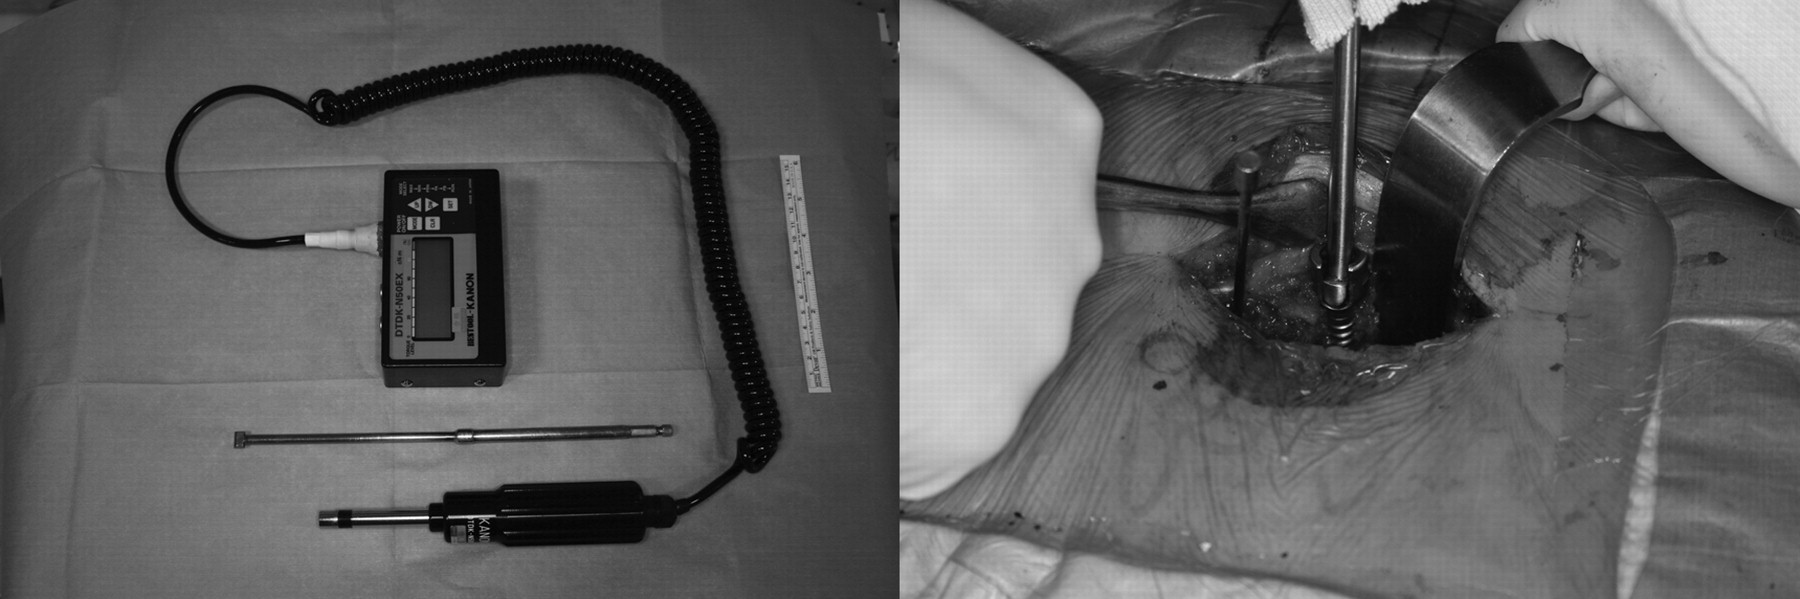 Fig. 1 
          Clinical photographs showing the
portable torque-measuring machine (left) and the torque gauge (DTDK-N50EX;
Kanon) connected to the pedicle screw with a specially designed
holder (right).
        